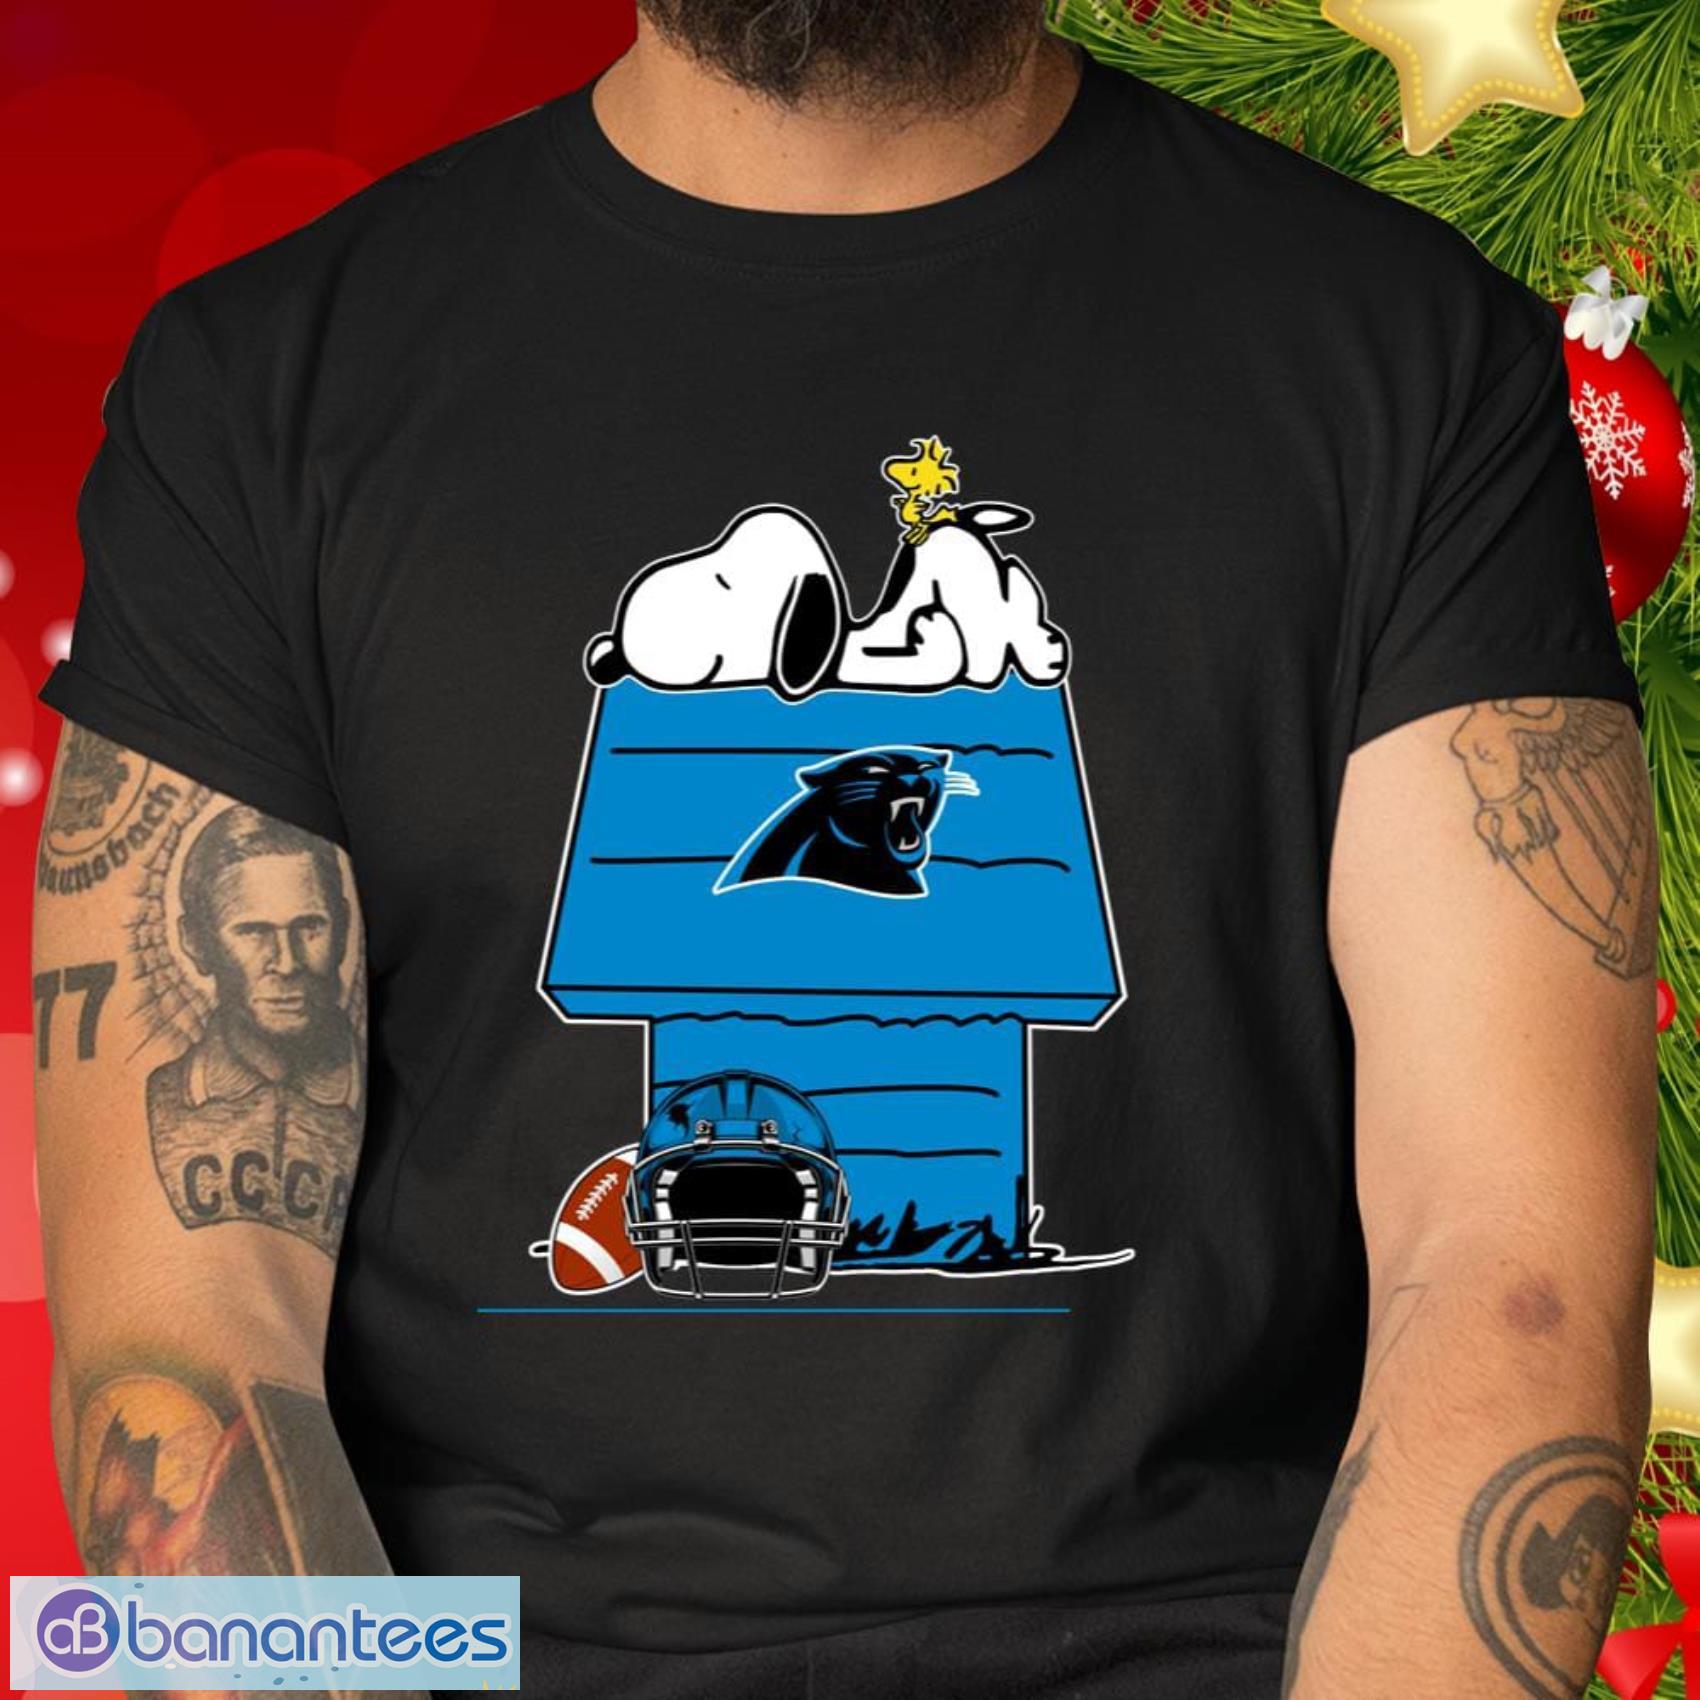 Carolina Panthers NFL Football Gift Fr Fans Snoopy Woodstock The Peanuts Movie T Shirt - Carolina Panthers NFL Football Snoopy Woodstock The Peanuts Movie T Shirt_2